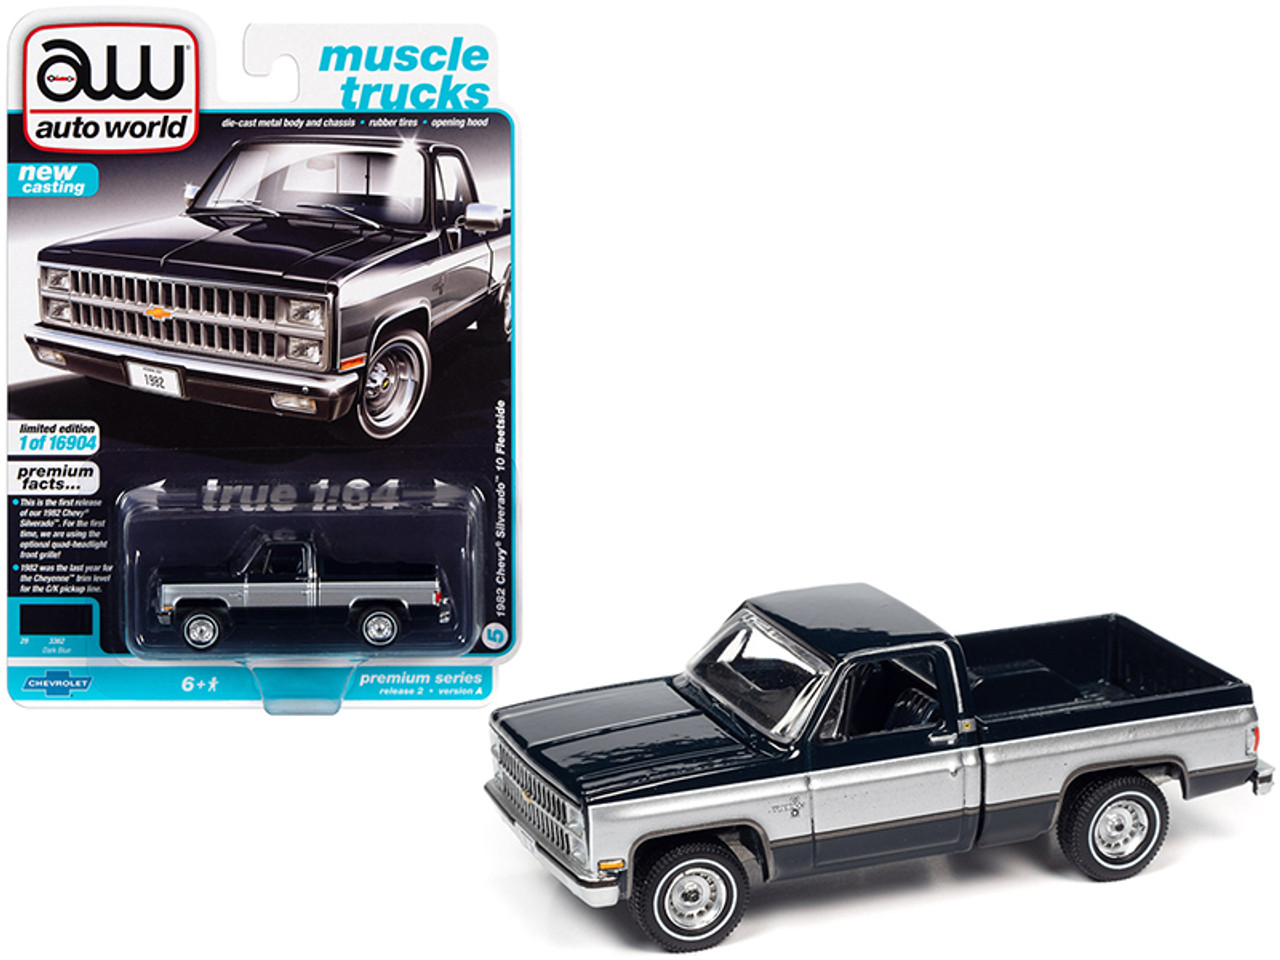 1982 Chevrolet Silverado 10 Fleetside Pickup Truck Dark Blue with Silver Sides "Muscle Trucks" Limited Edition to 16904 pieces Worldwide 1/64 Diecast Model Car by Autoworld